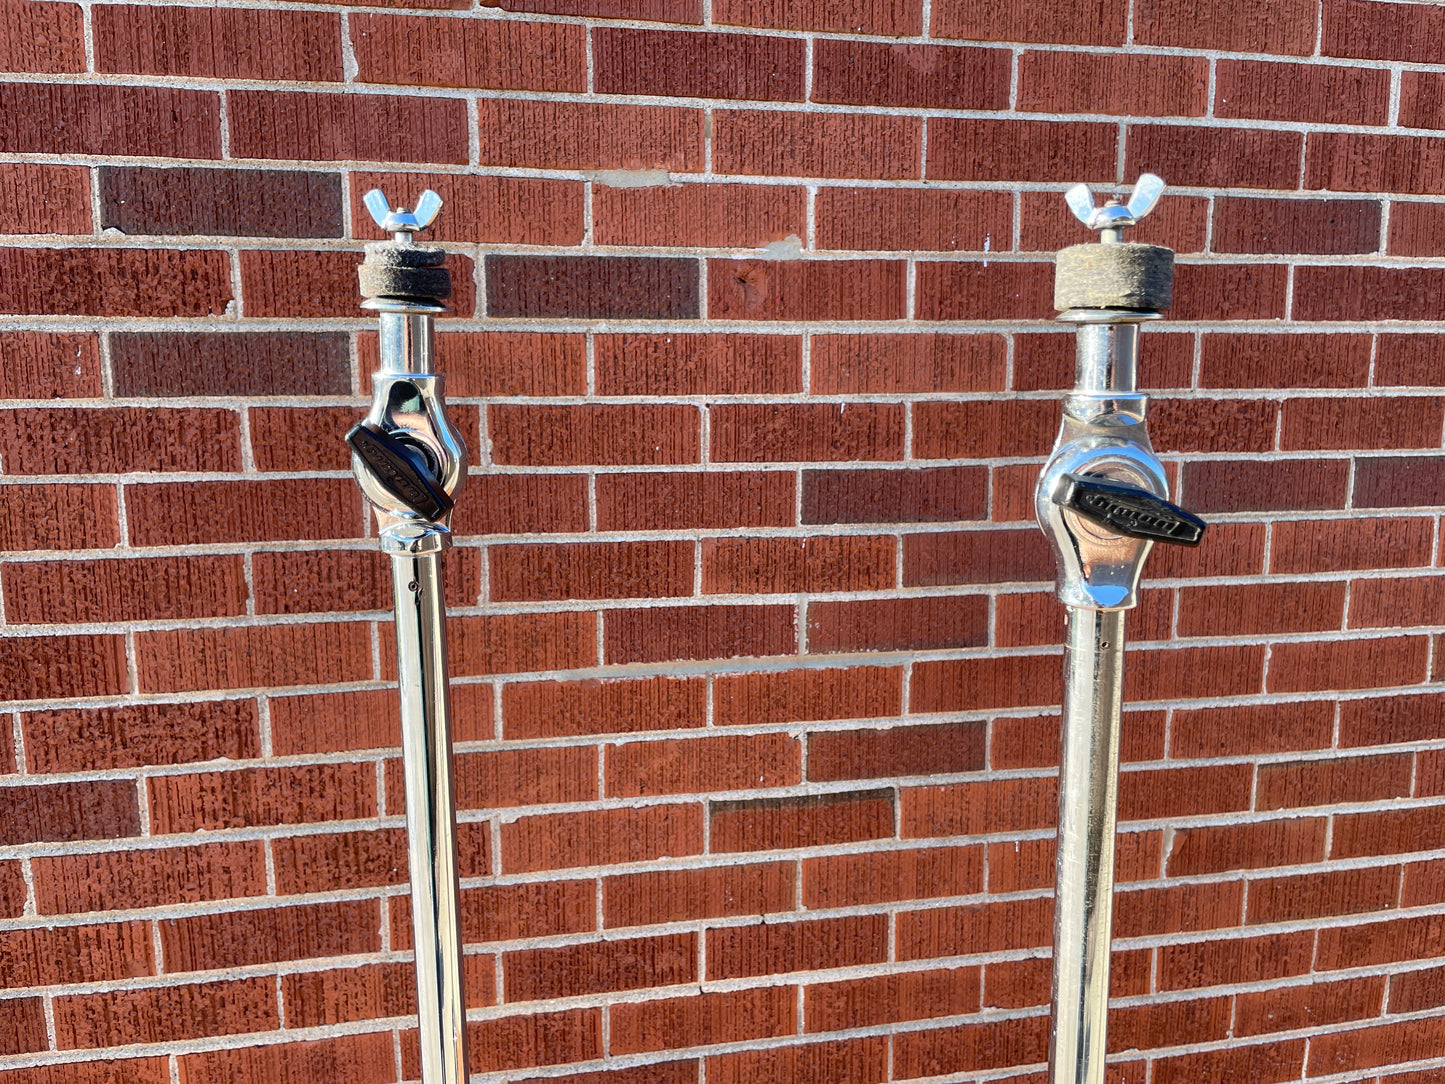 1970s-1980s Ludwig No. 1406 Hercules Cymbal Stand Pair (x2)